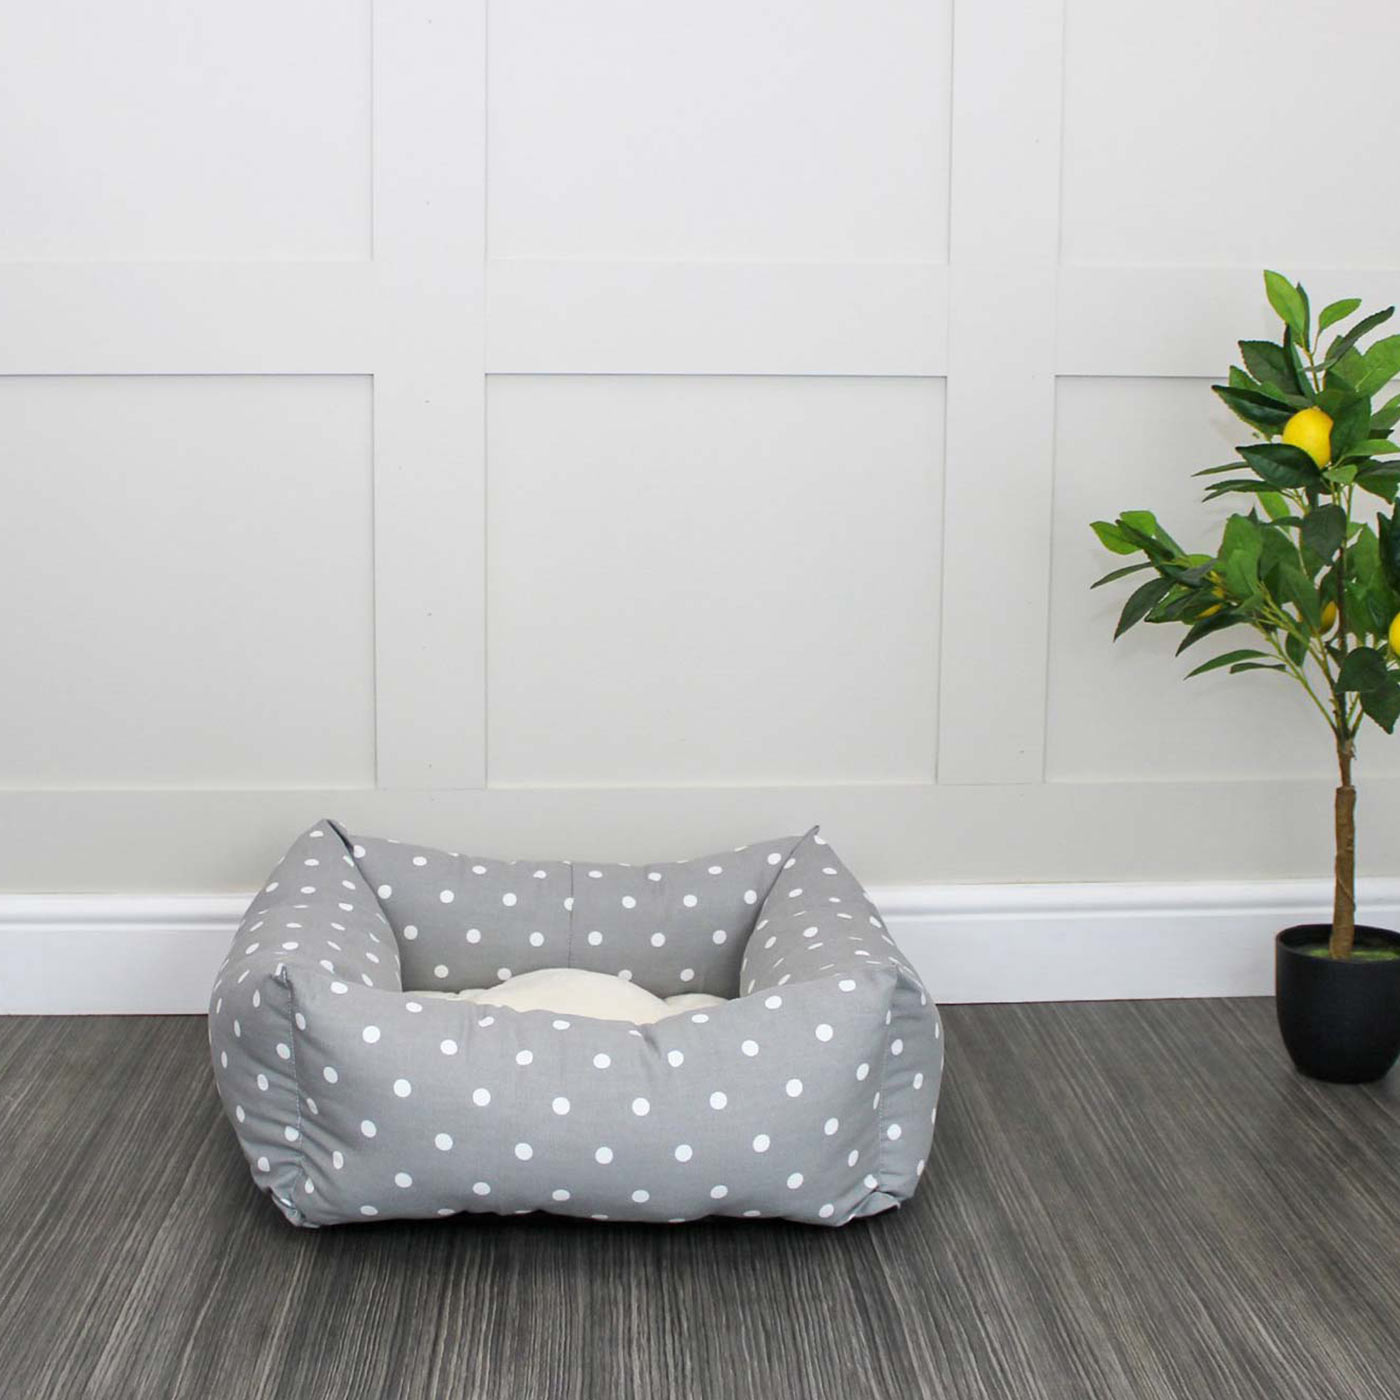 Luxury, Handmade Box Bed For Dogs, A Stunning Grey Spot Dog Bed Perfect For Your Pets Nap Time! Available at Lords & Labradors